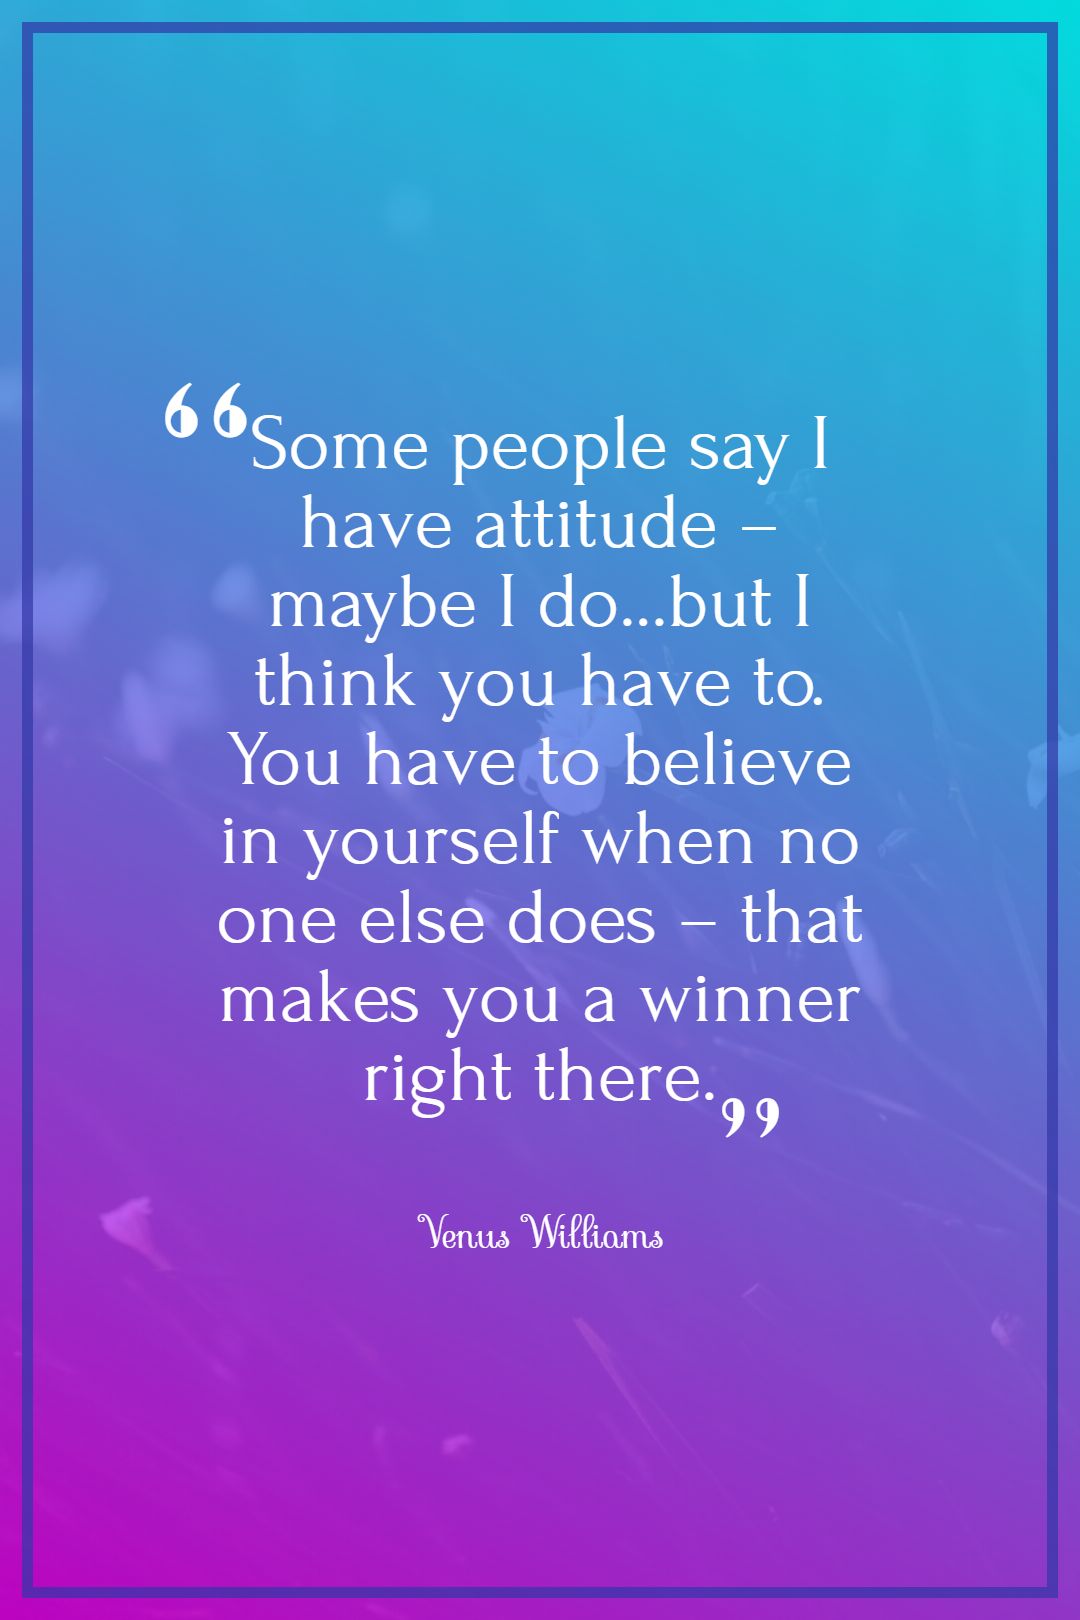 Some people say I have attitude – maybe I do…but I think you have to. You have to believe in yourself when no one else does – that makes you a winner right there.